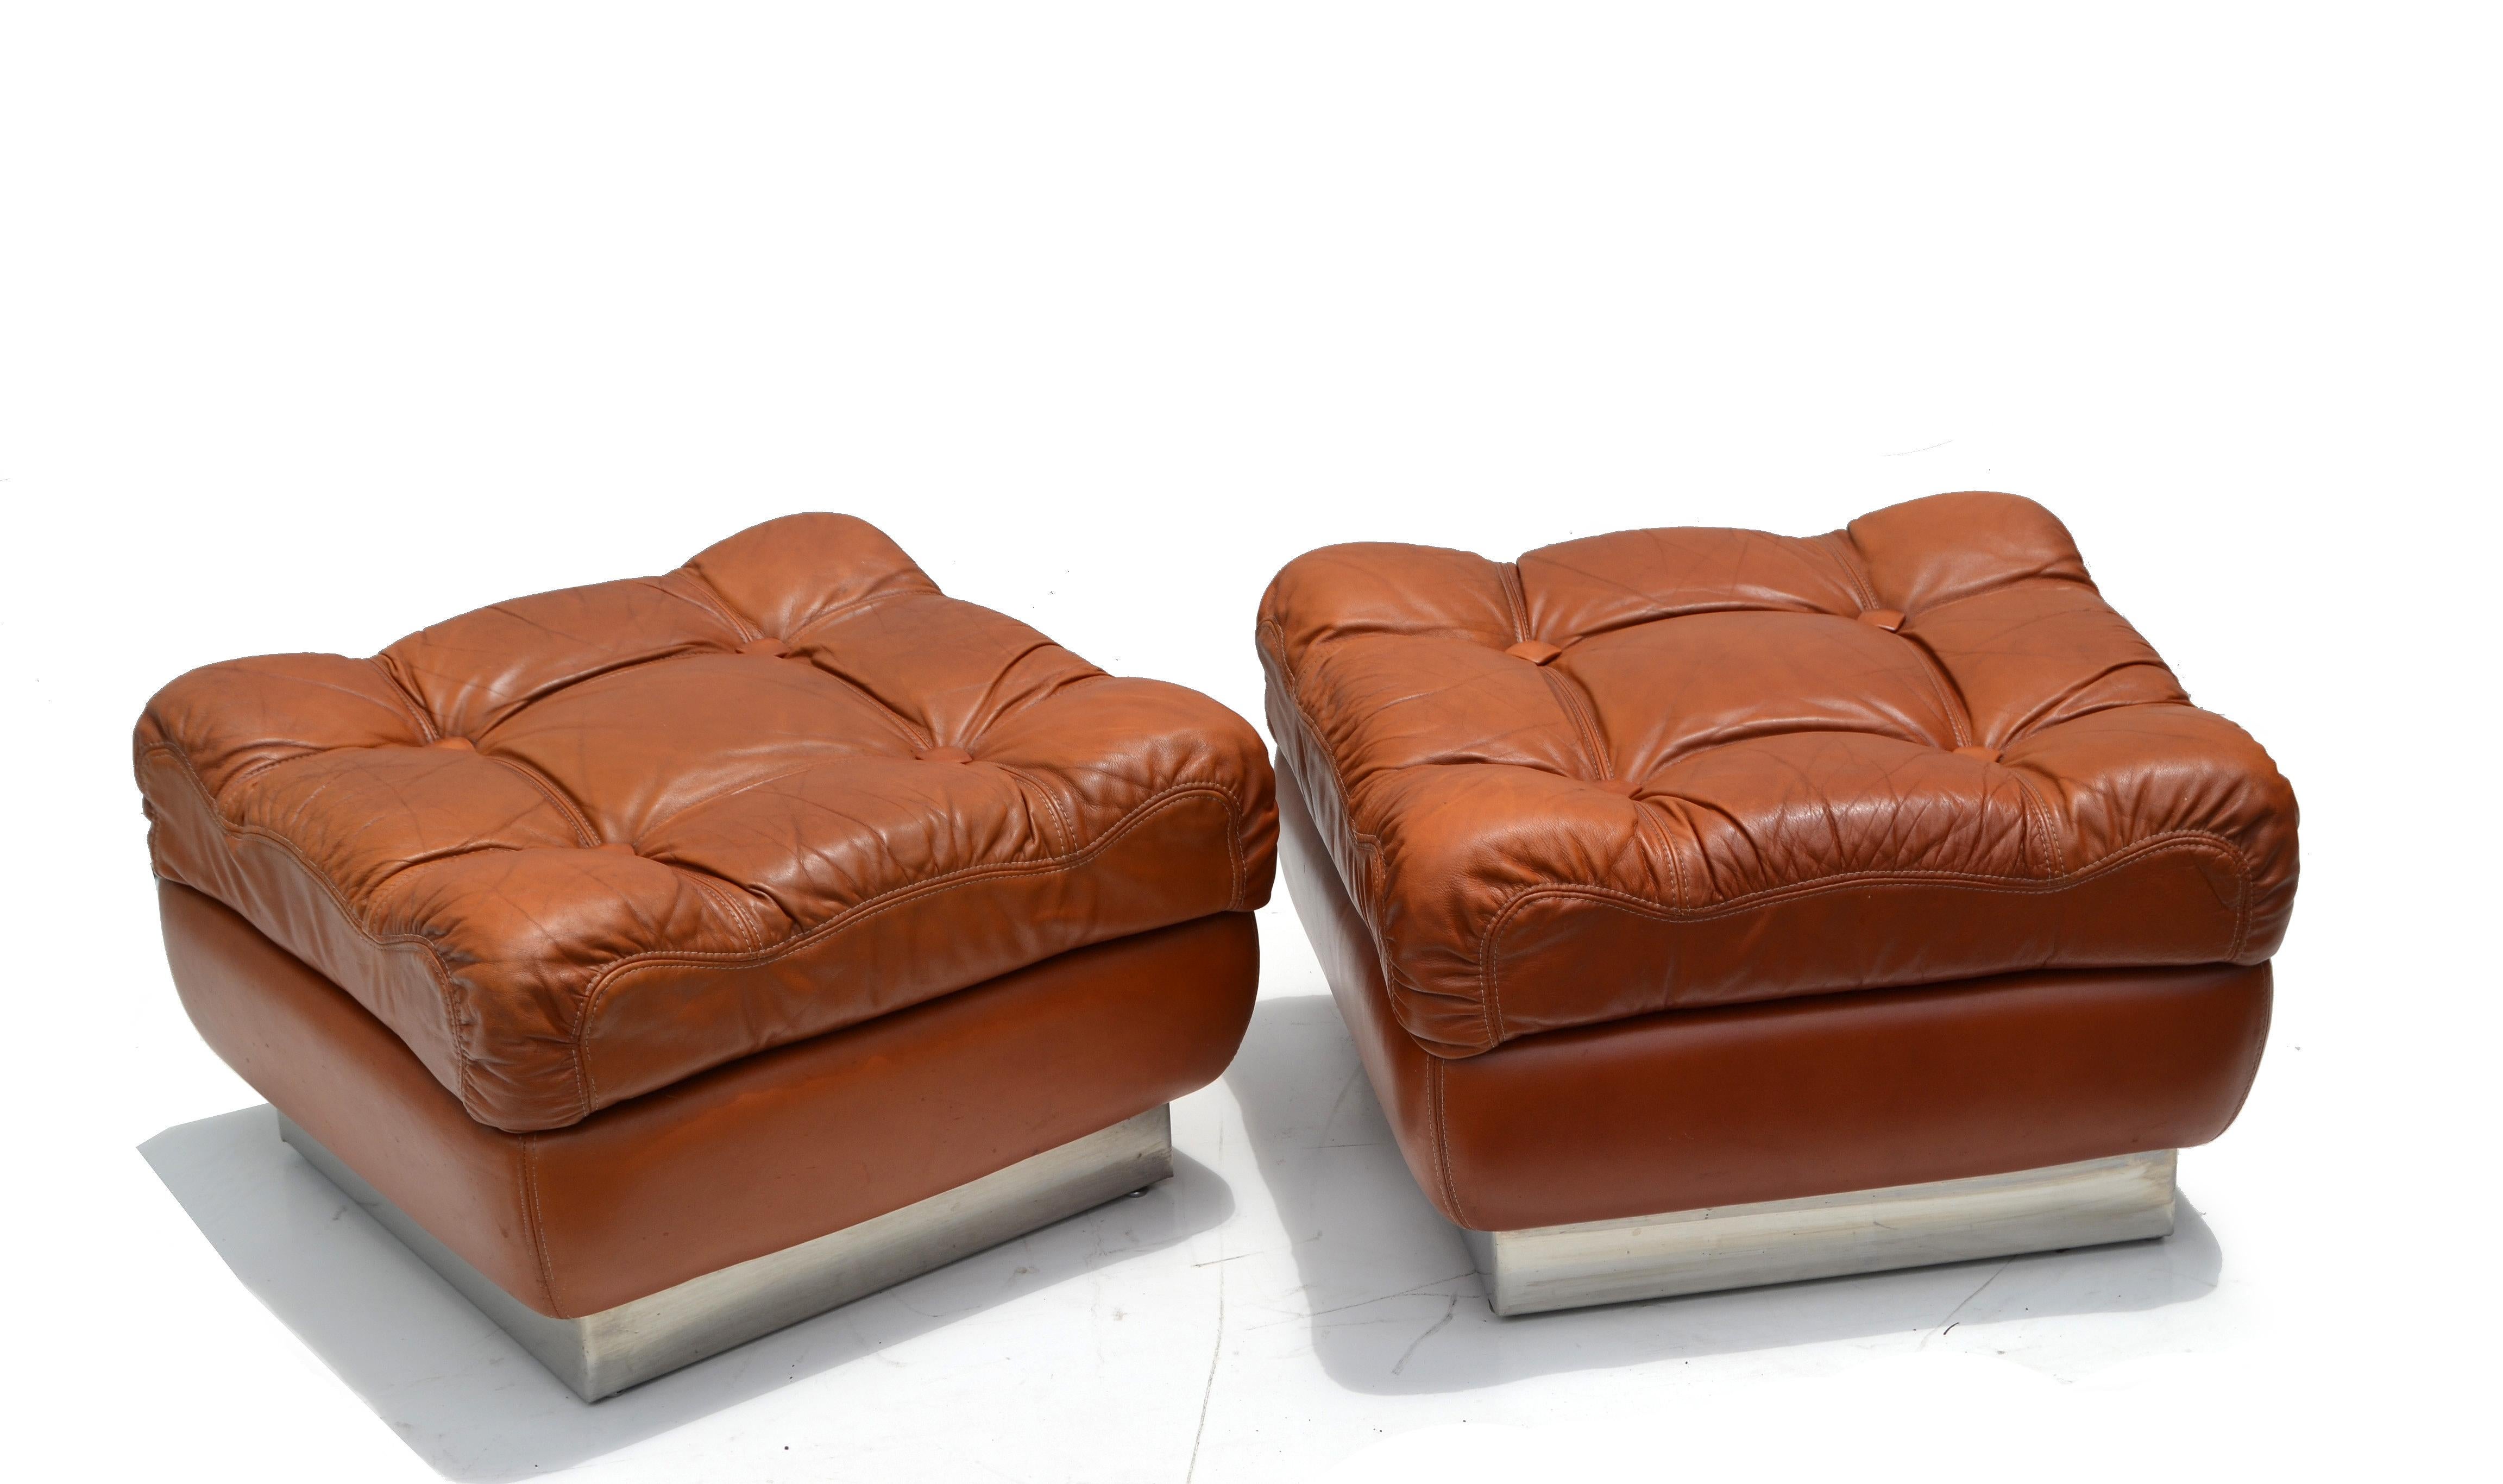 Jacques Charpentier Mid-Century Modern Tufted Leather Ottoman Stool Pair For Sale 7